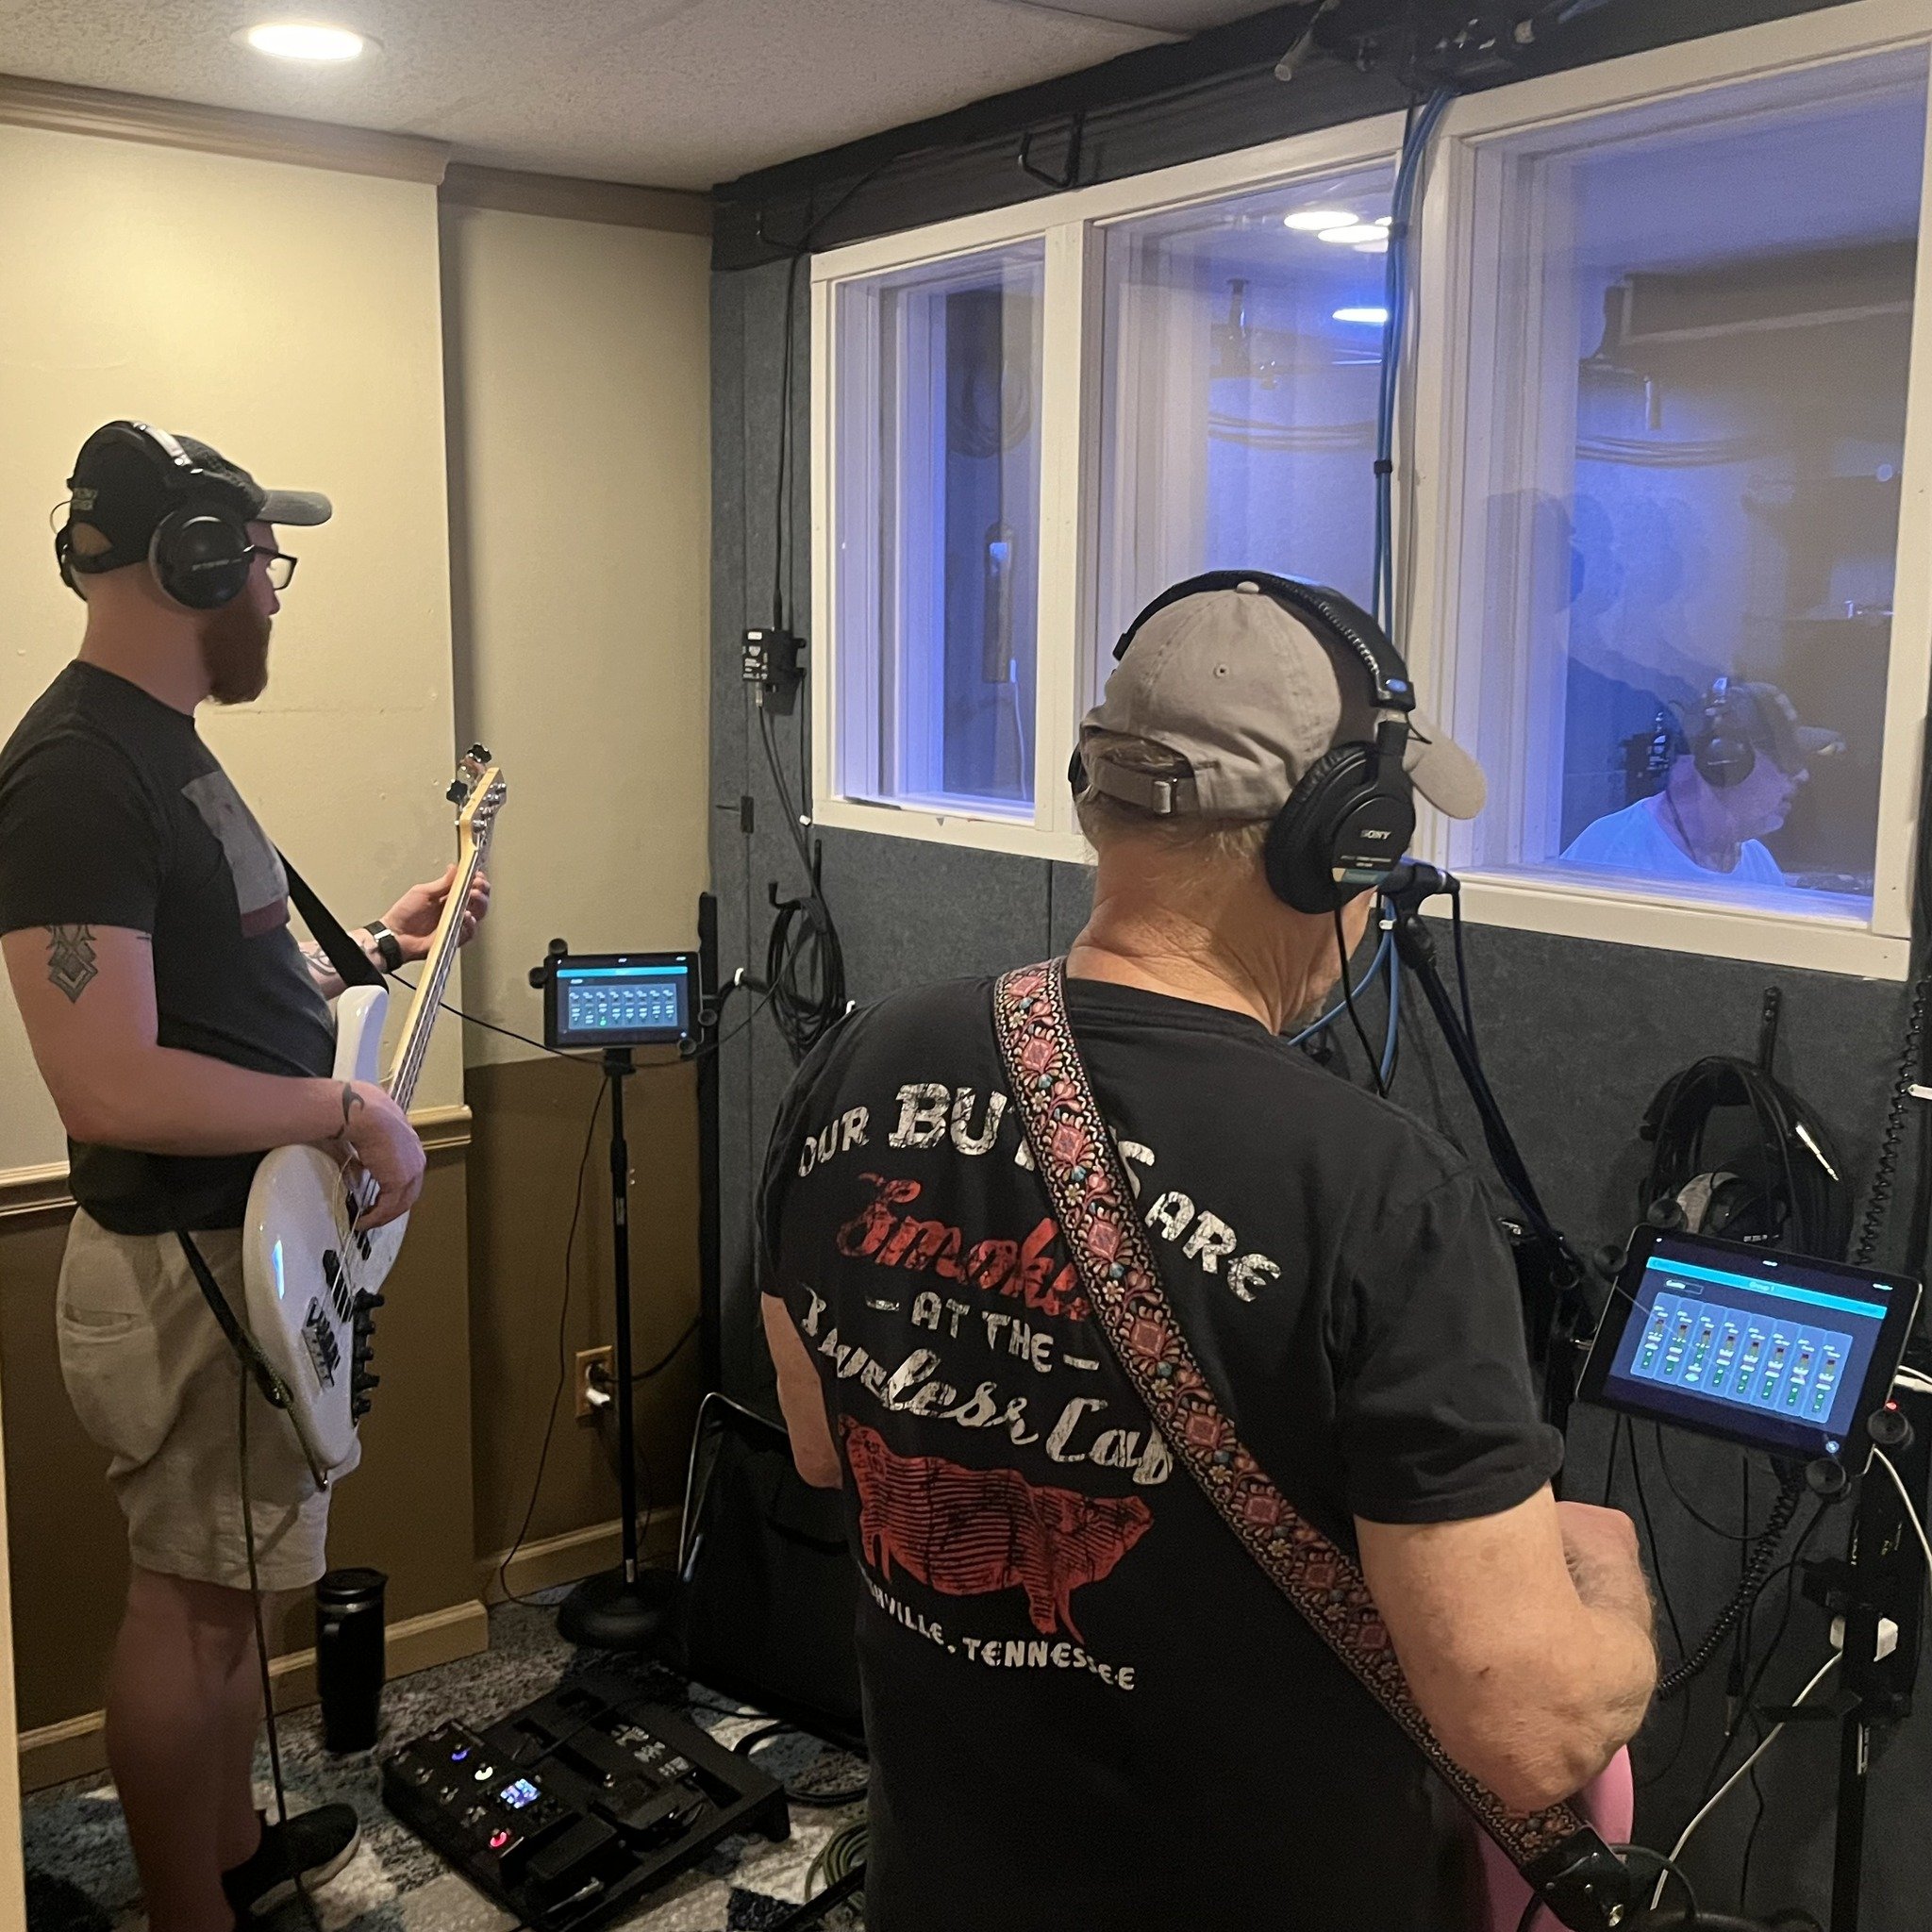 Live tracking with @therealdealrocks, featuring @micahnortrup and @leightonthomasmusic! 

Reach out to book a session or learn more&mdash;link in bio &gt;&gt;
.
.
.
#hiddencreekmusic #musicproducer #musicproduction #musicstudio #recordingstudio #reco